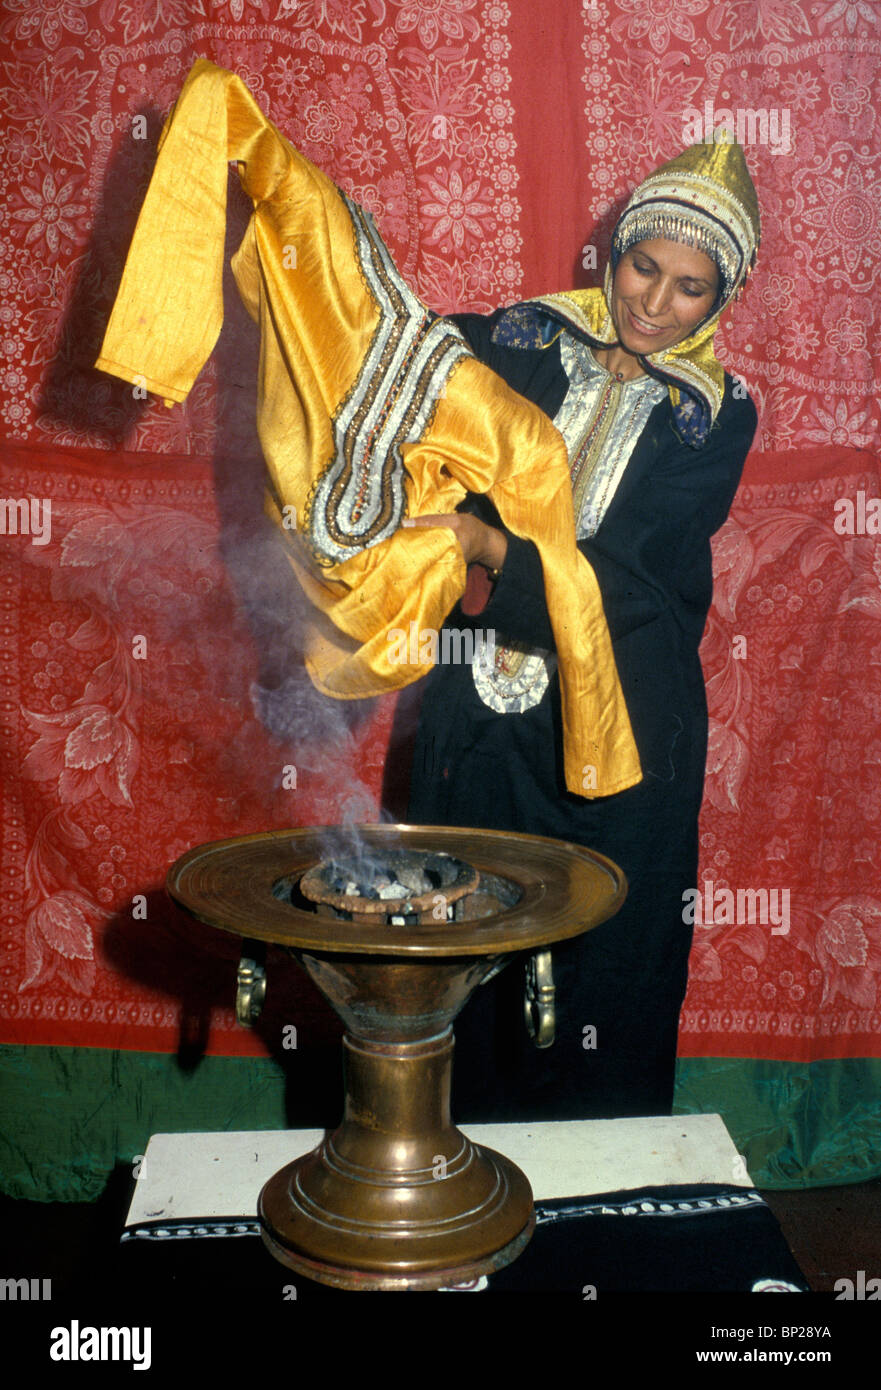 PERFUMING SHABBAT CLOTHES - A YEMENITE-JEWISH WOMAN BURNS INCENSE ON FRIDAY AFTERNOON TO GIVE HER SABBAT CLOTHING & THE ROOMS Stock Photo